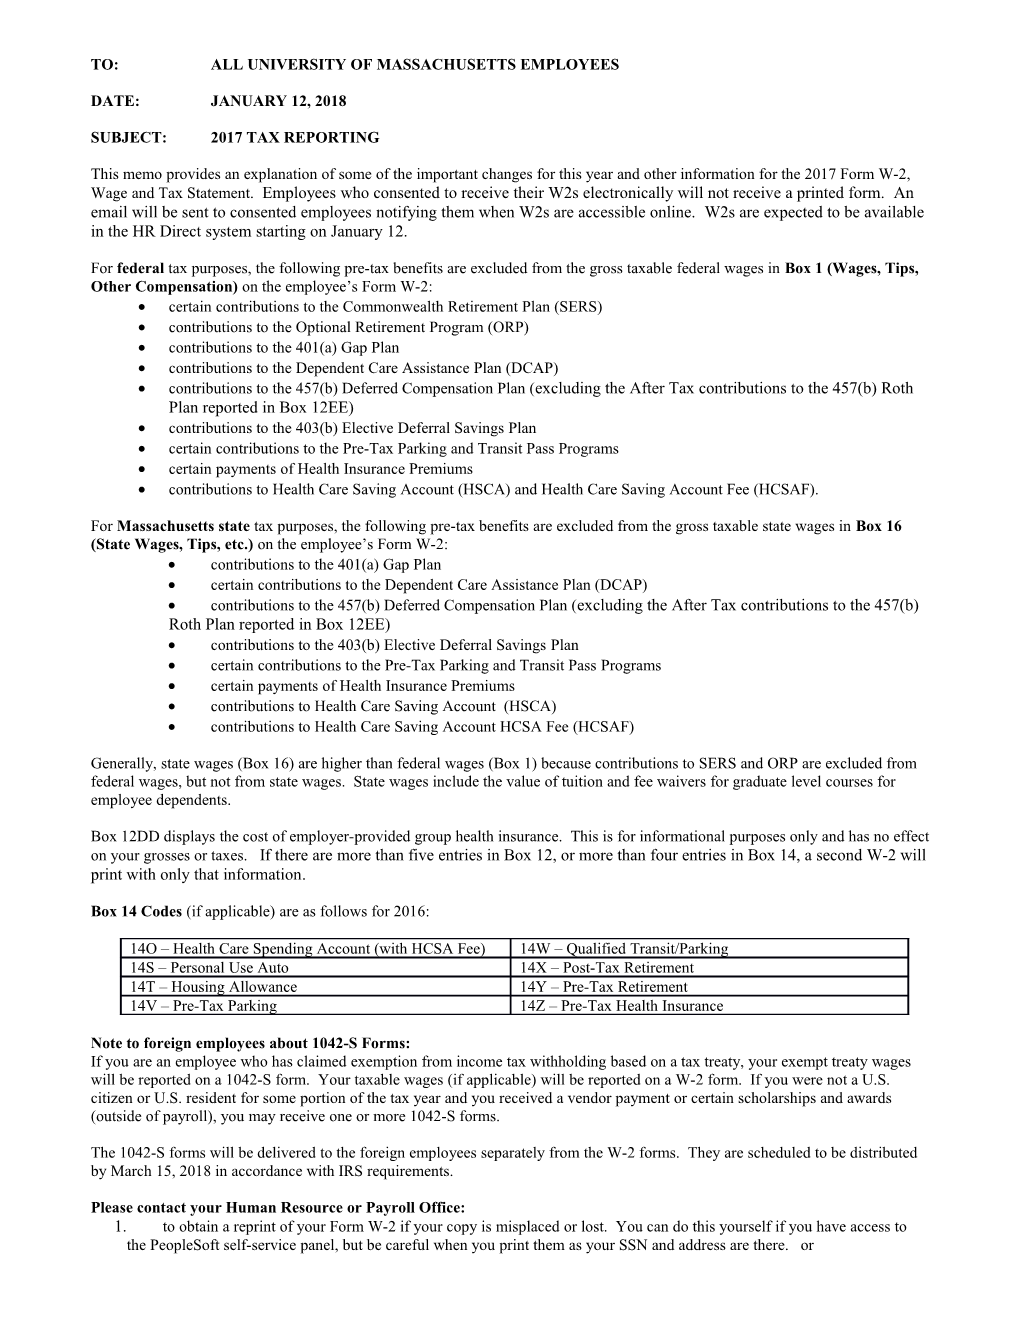 This Memo Provides a Detailed Explanation of the Form W-2, Wage and Tax Statement